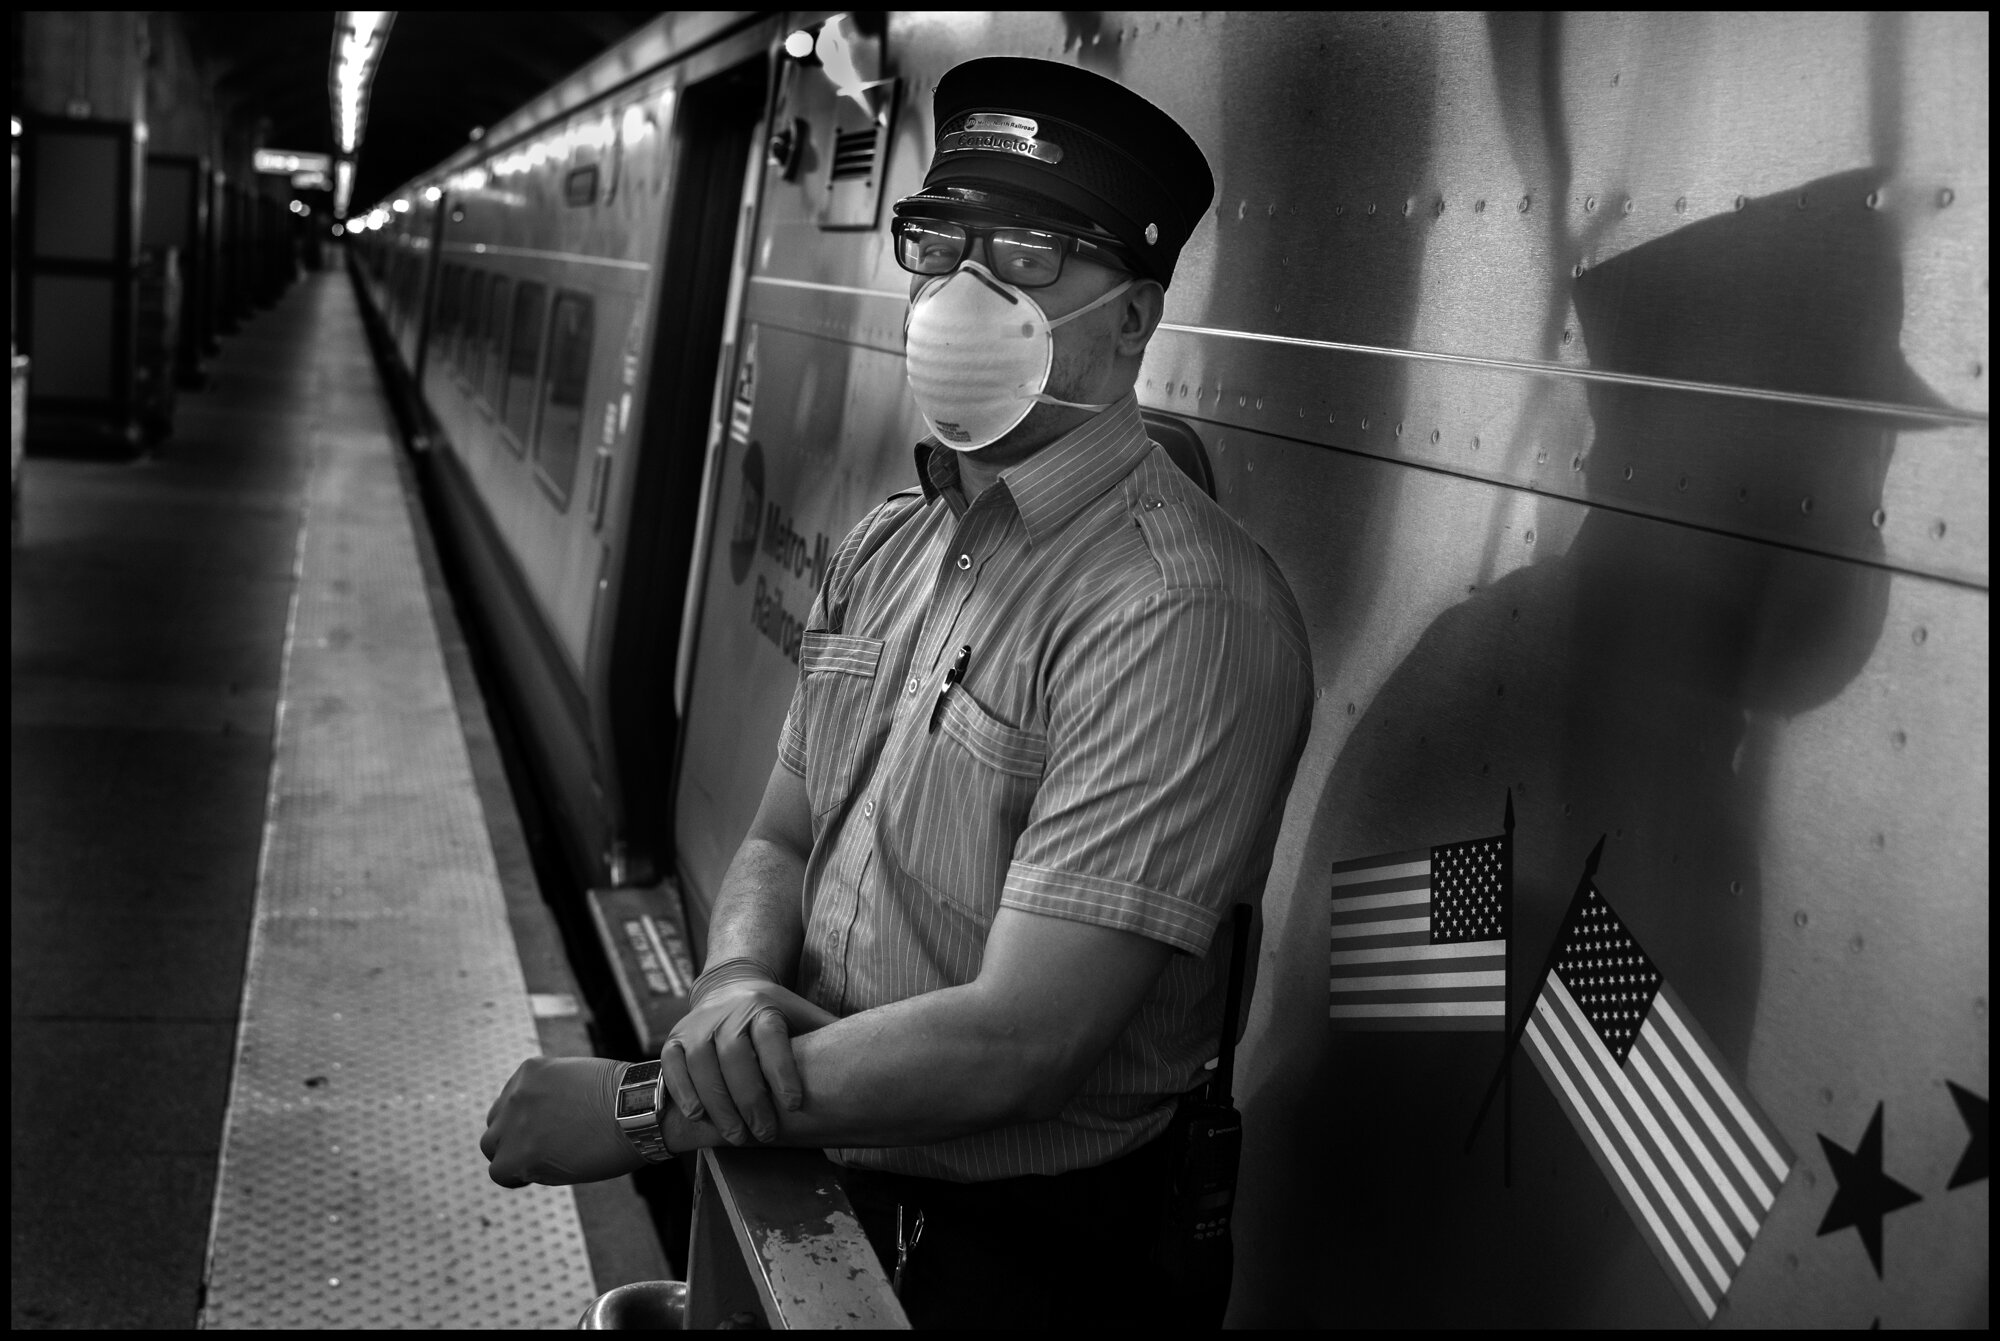  Jason, 38, conductor.   April 18, 2020. © Peter Turnley  ID# 25-011 